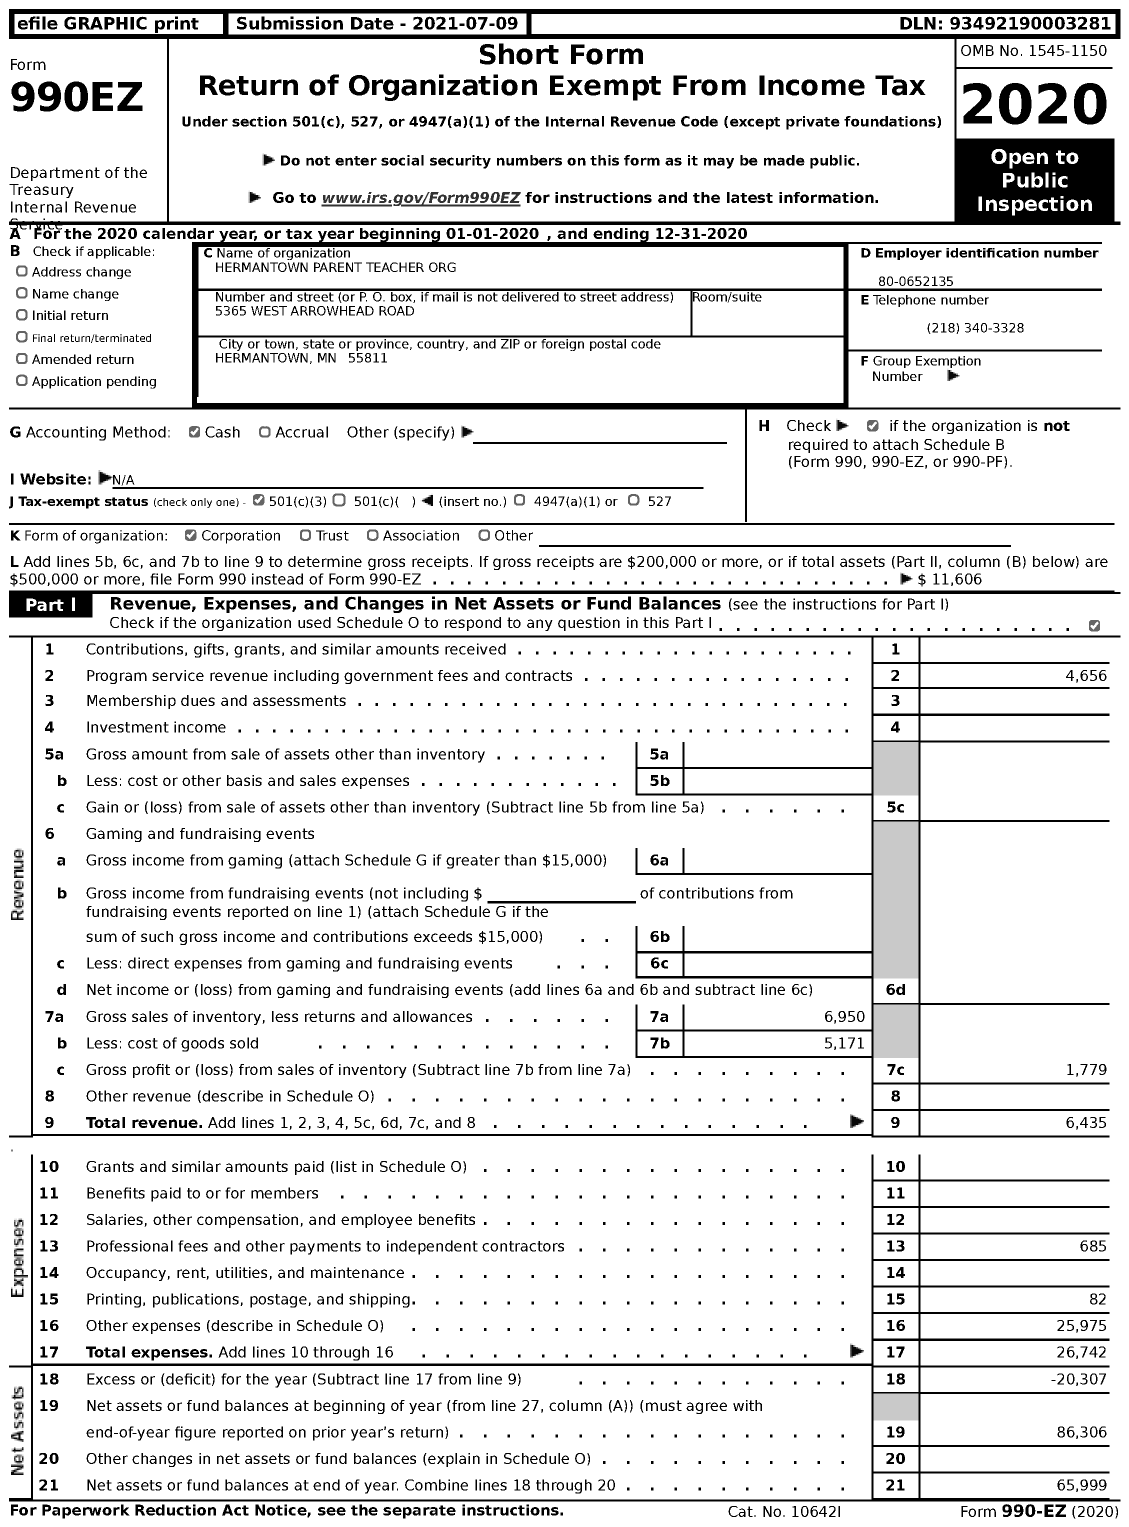 Image of first page of 2020 Form 990EZ for Hermantown Parent Teacher Org